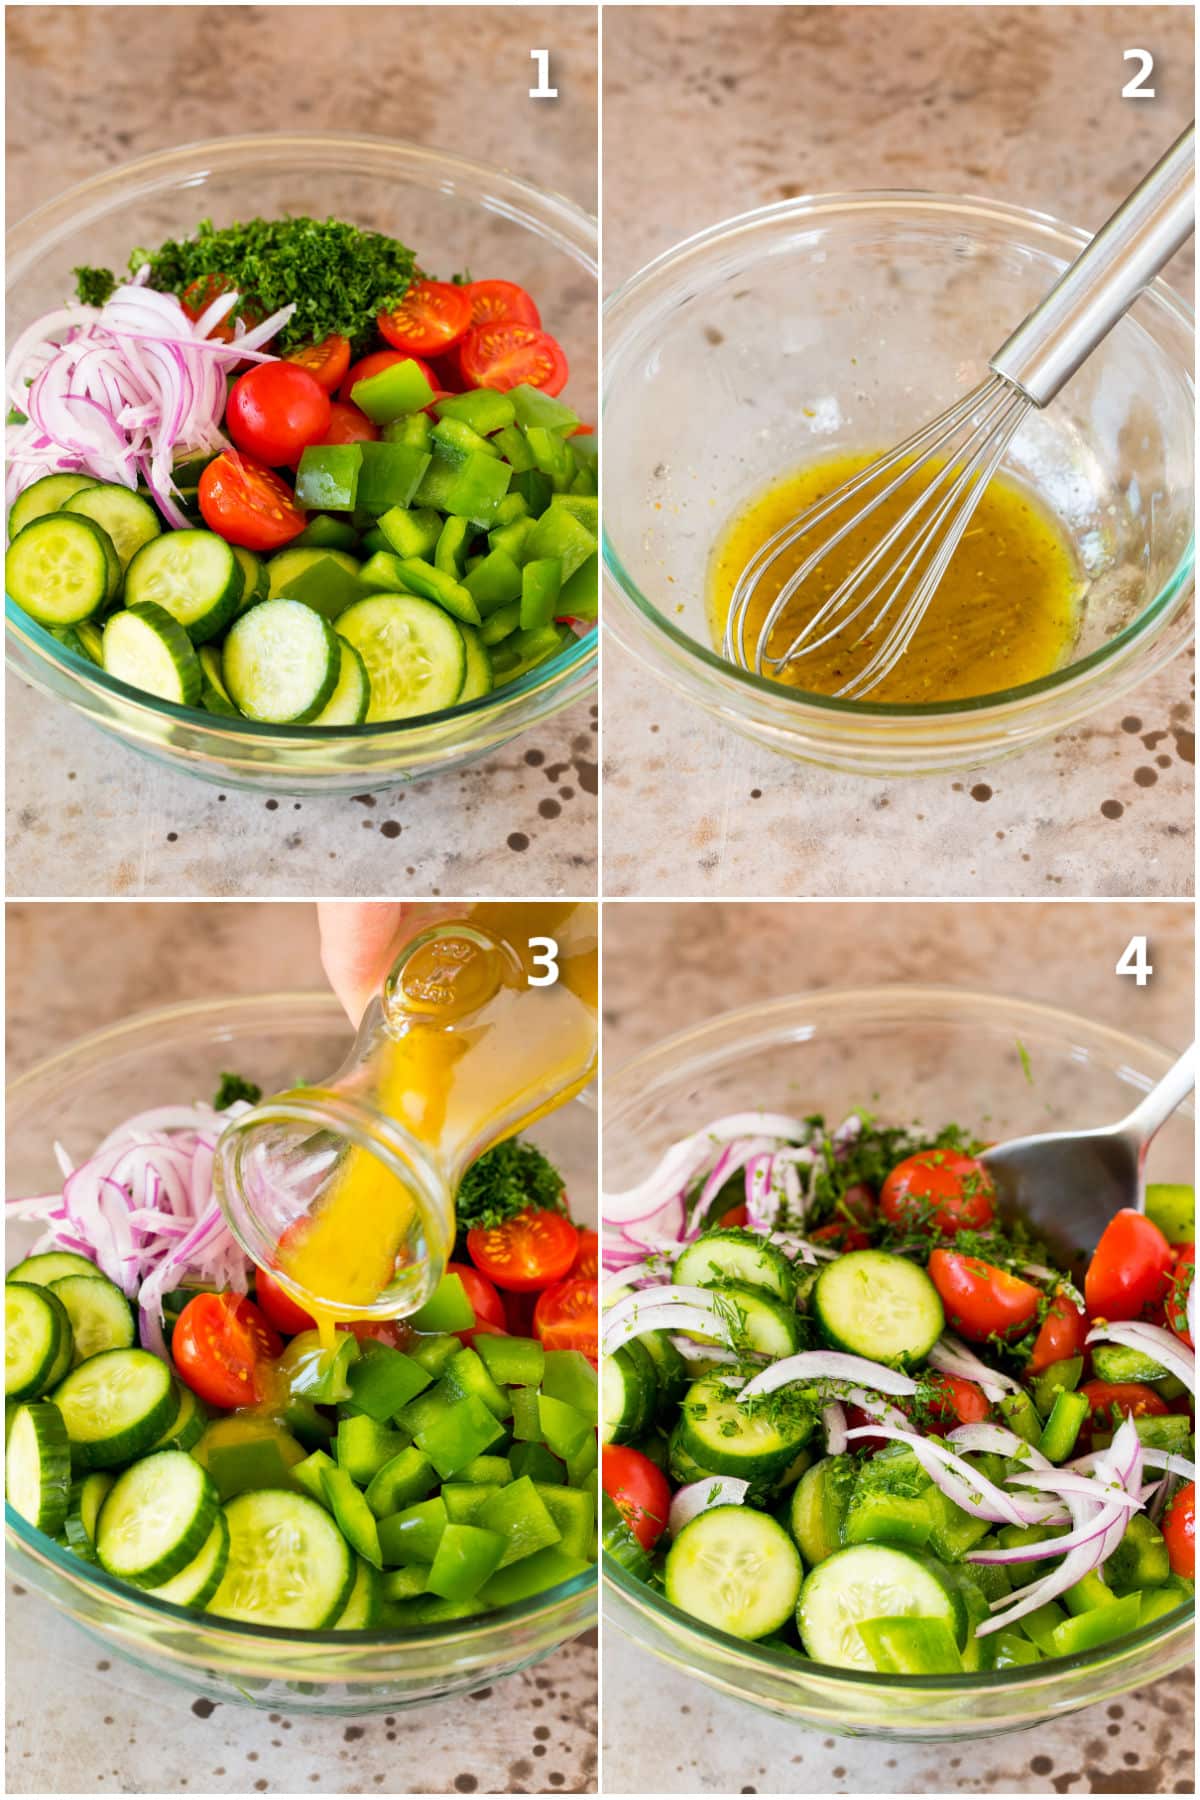 Step by step process shots showing how to make tomato cucumber salad.